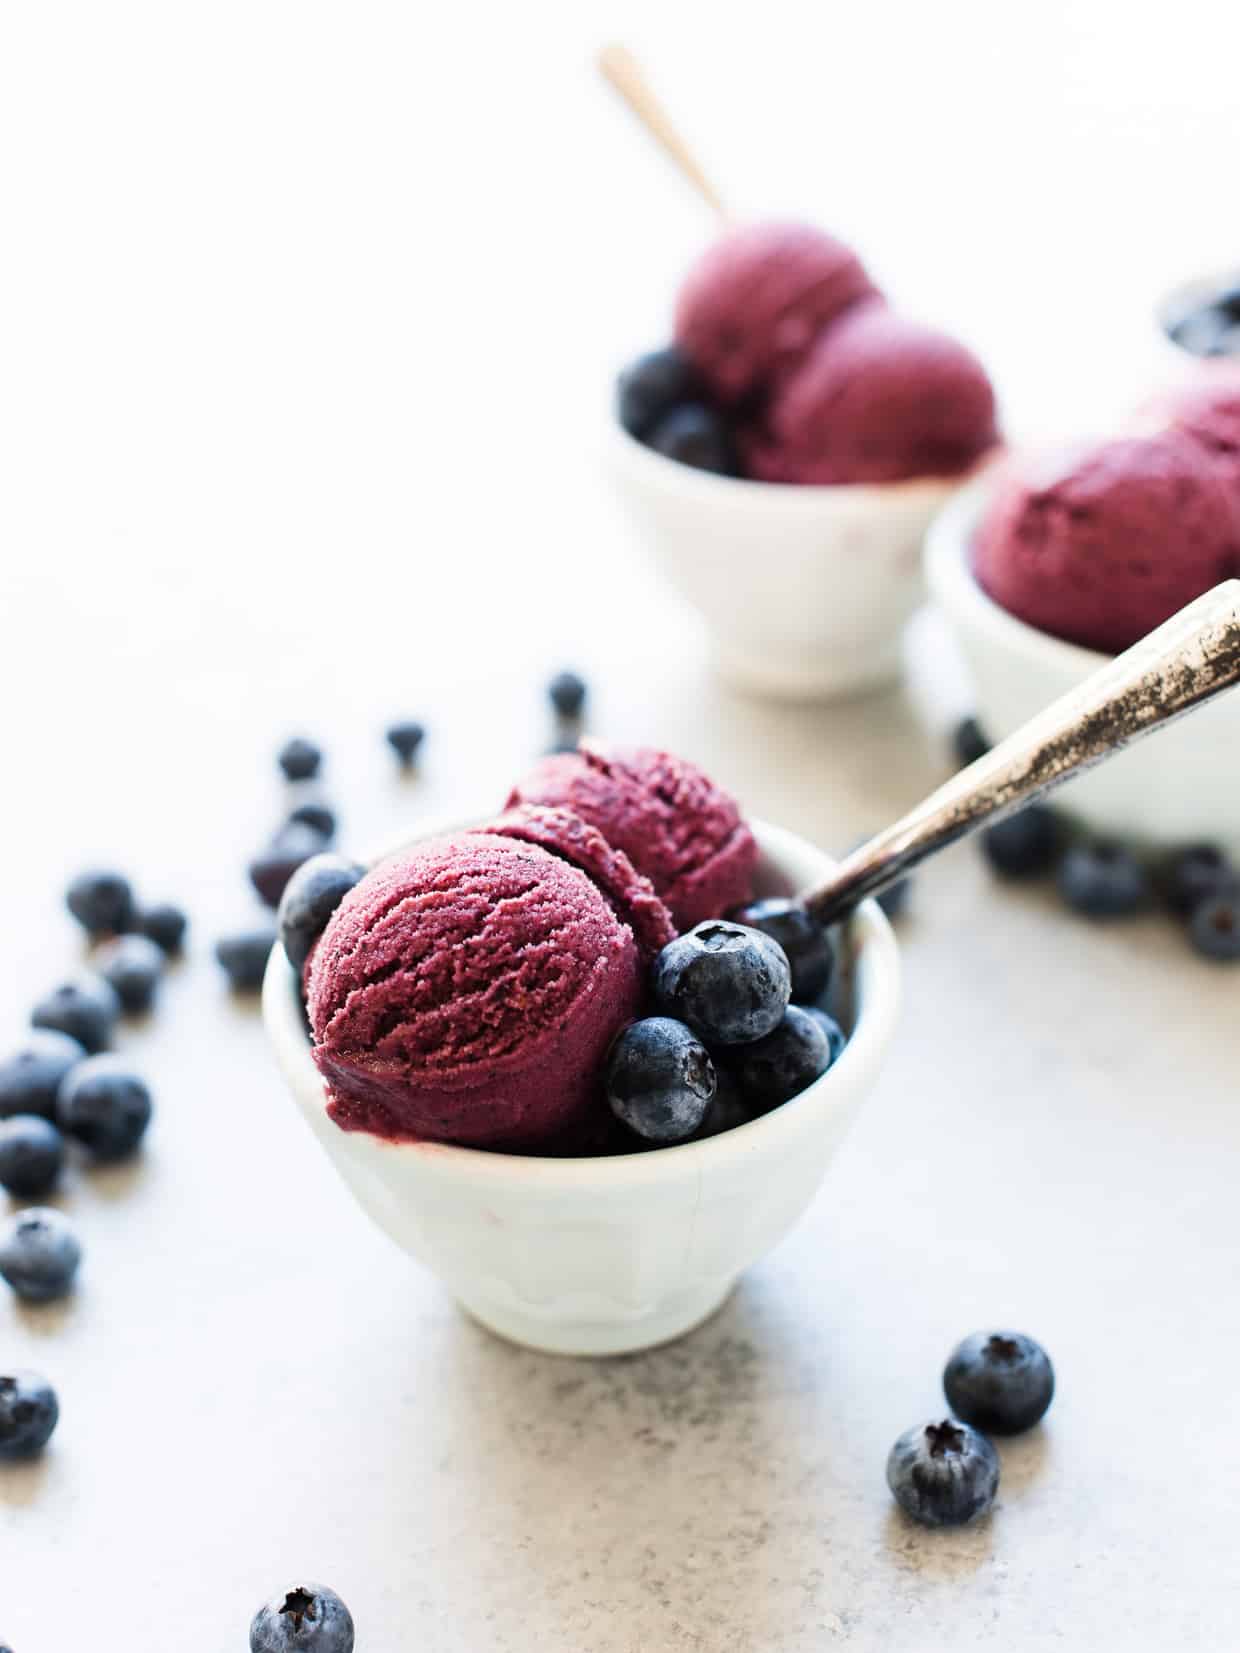 Blueberry Açaí Frozen Yogurt served in small white bowls with blueberries for garnish.